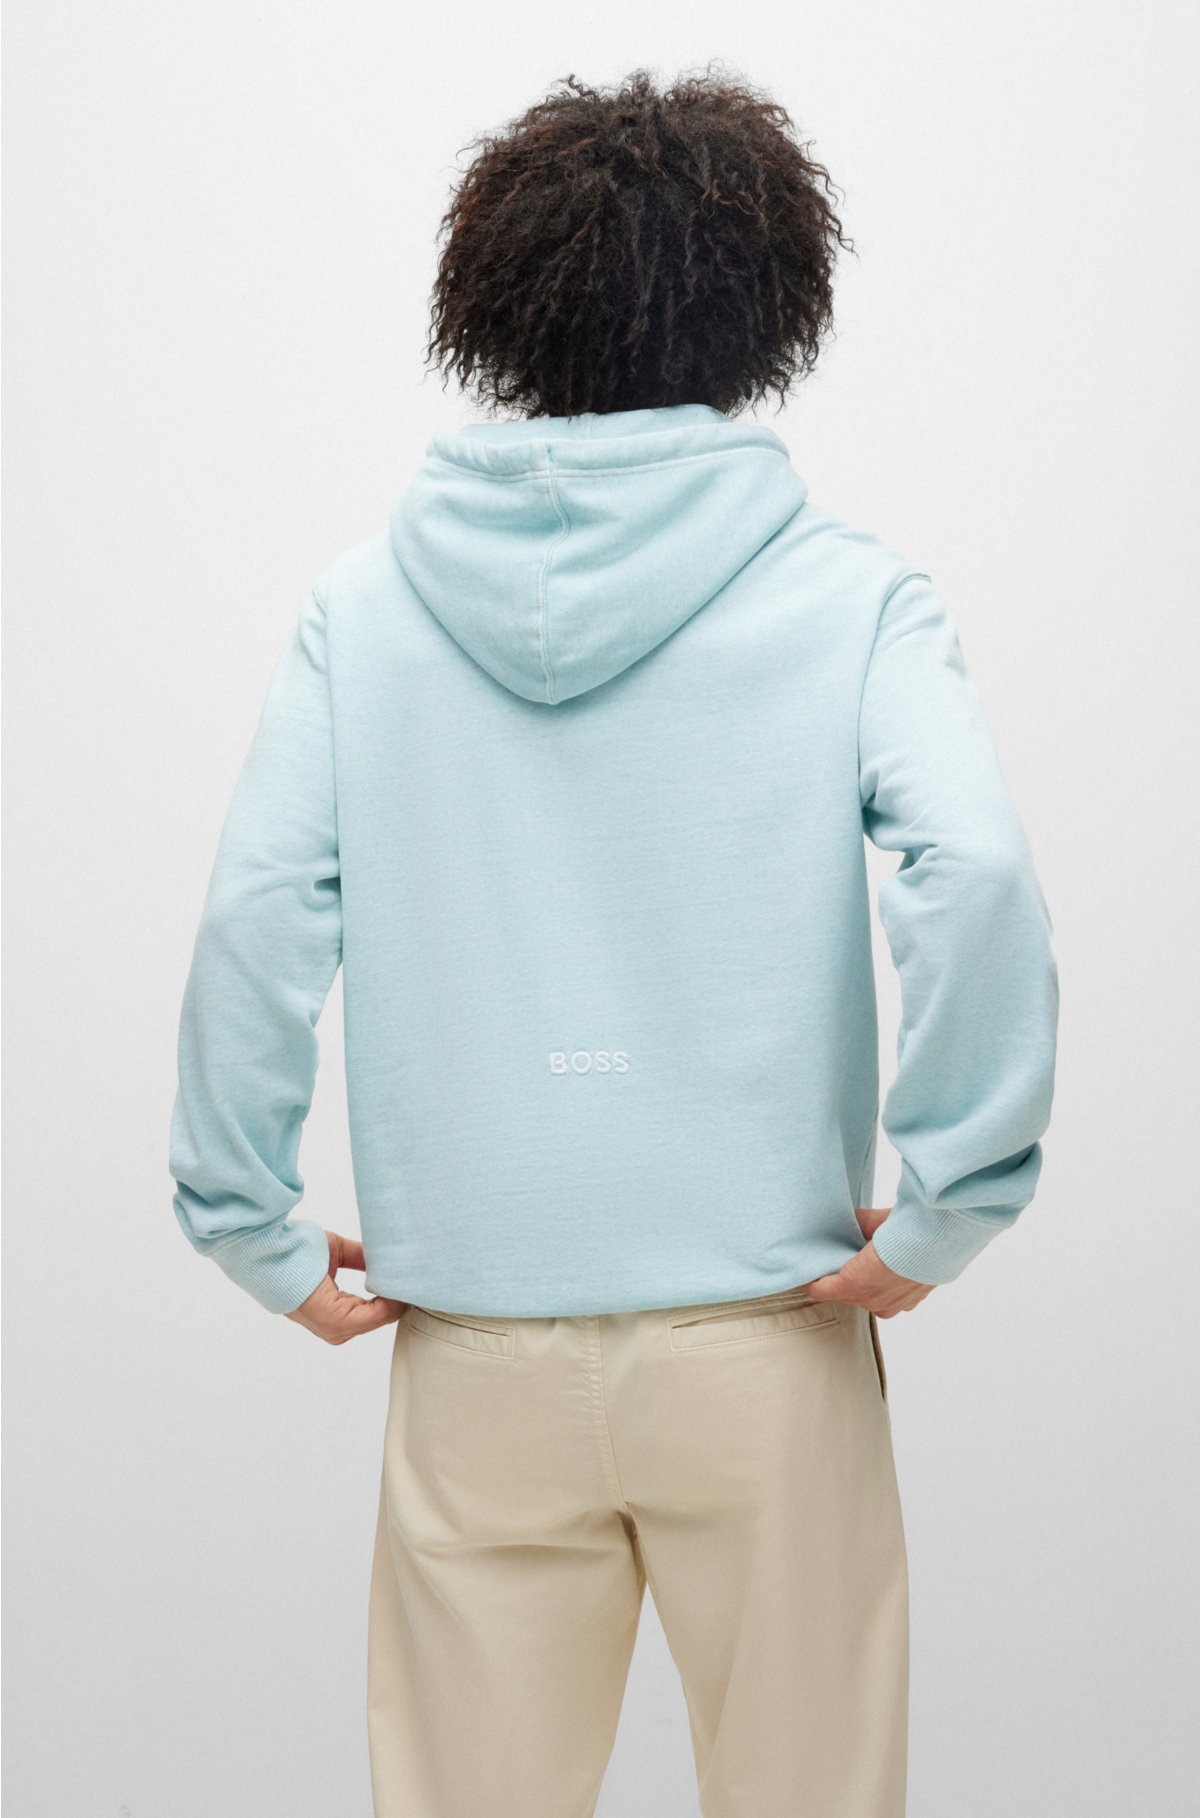 logo - BOSS embroidered with relaxed-fit Cotton-blend hoodie